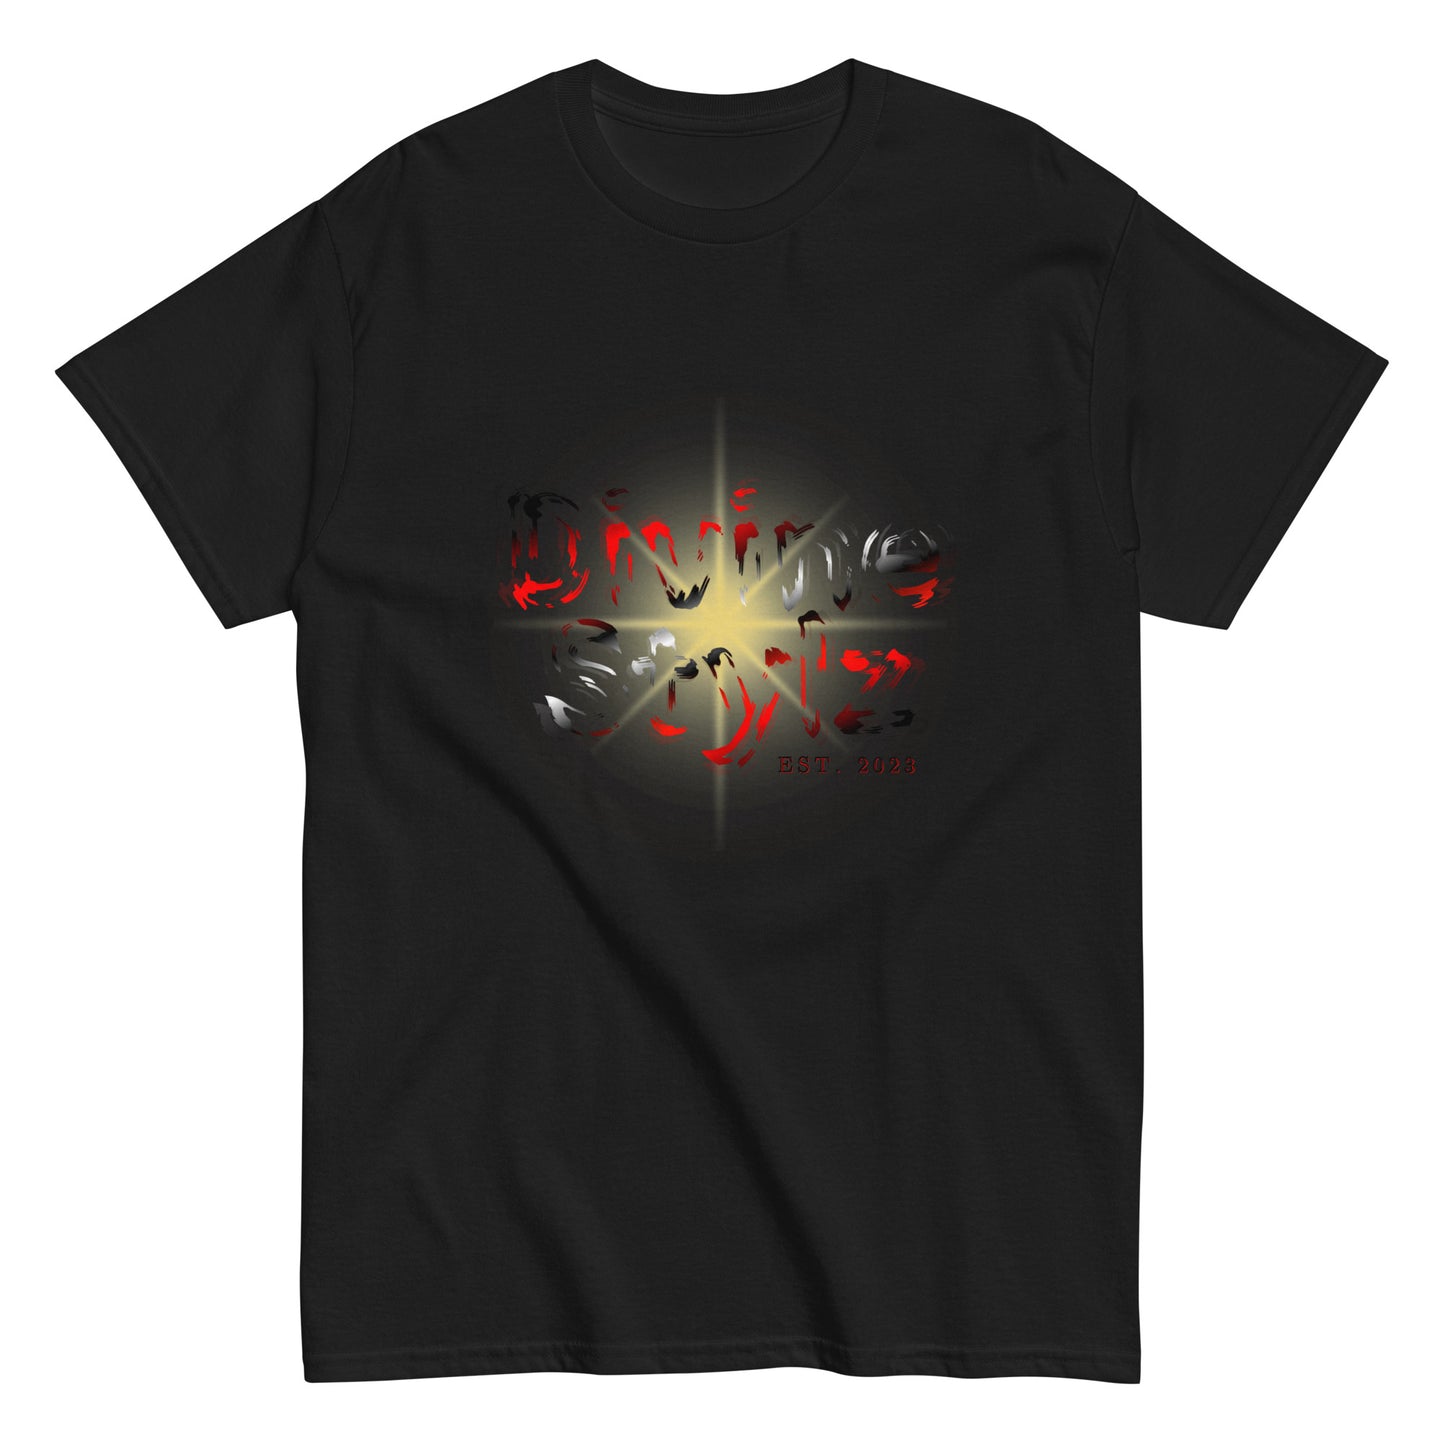 Men's classic tee - Divine Stylz 'Shattered Star'